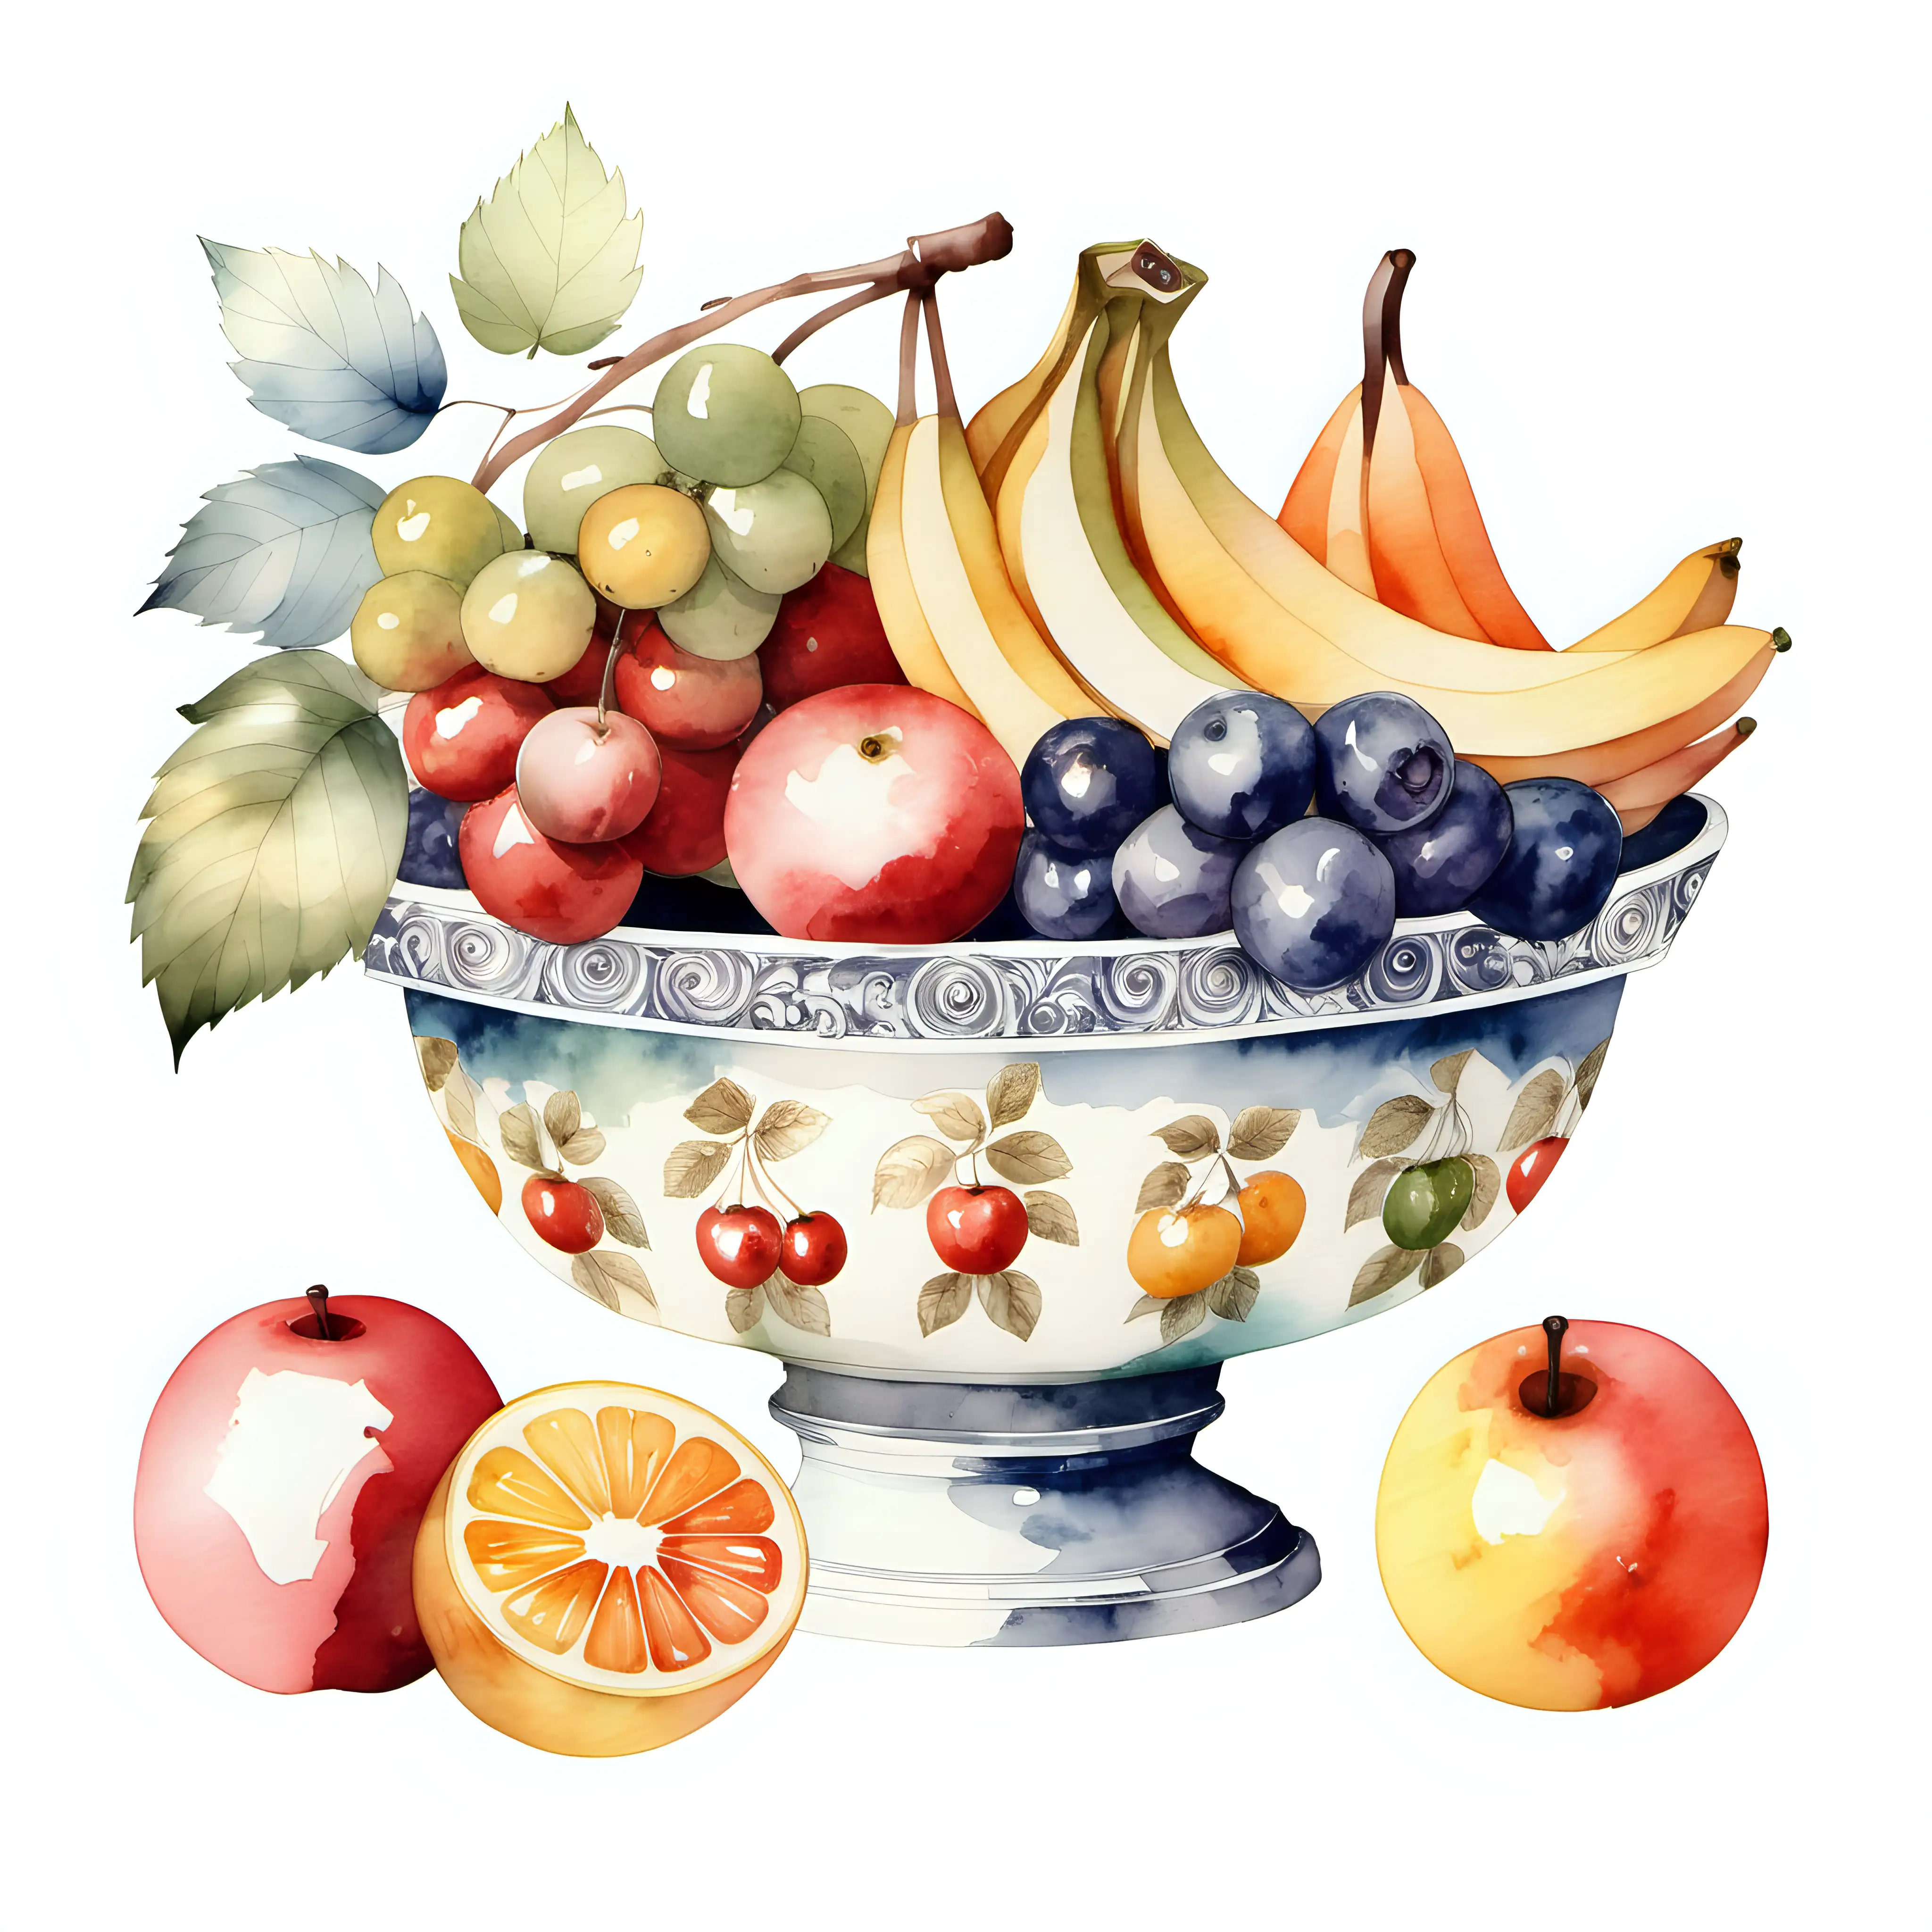 Polish Fruit Bowl in Vintage Watercolor Style on White Background